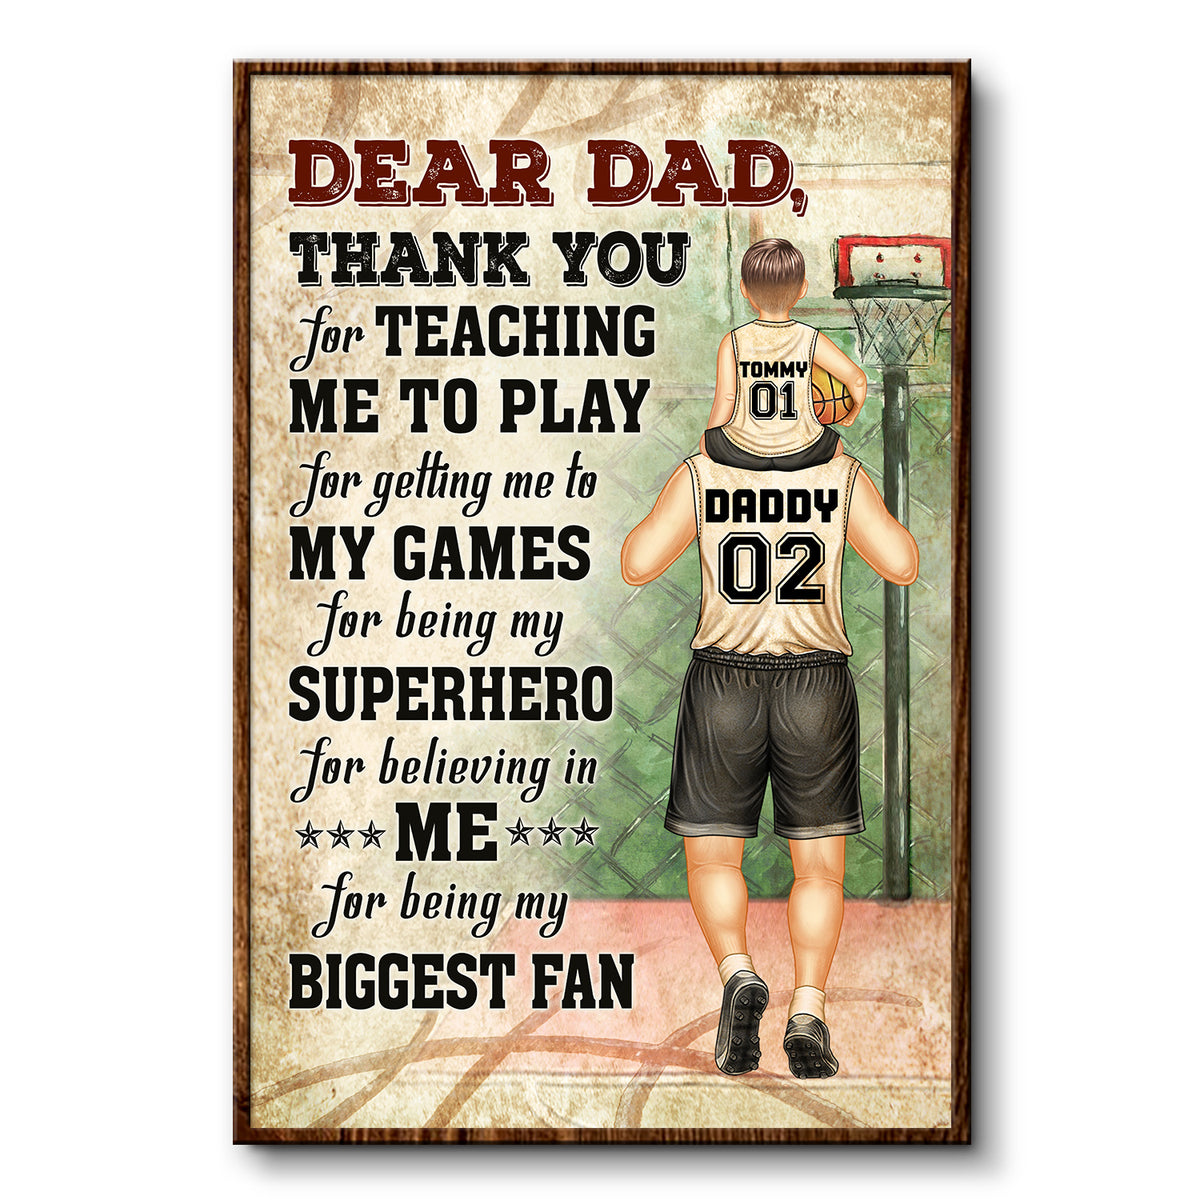 Discover Dear Dad Thank You For Teaching Me - Gift For Basketball Fans - Personalized Custom Poster